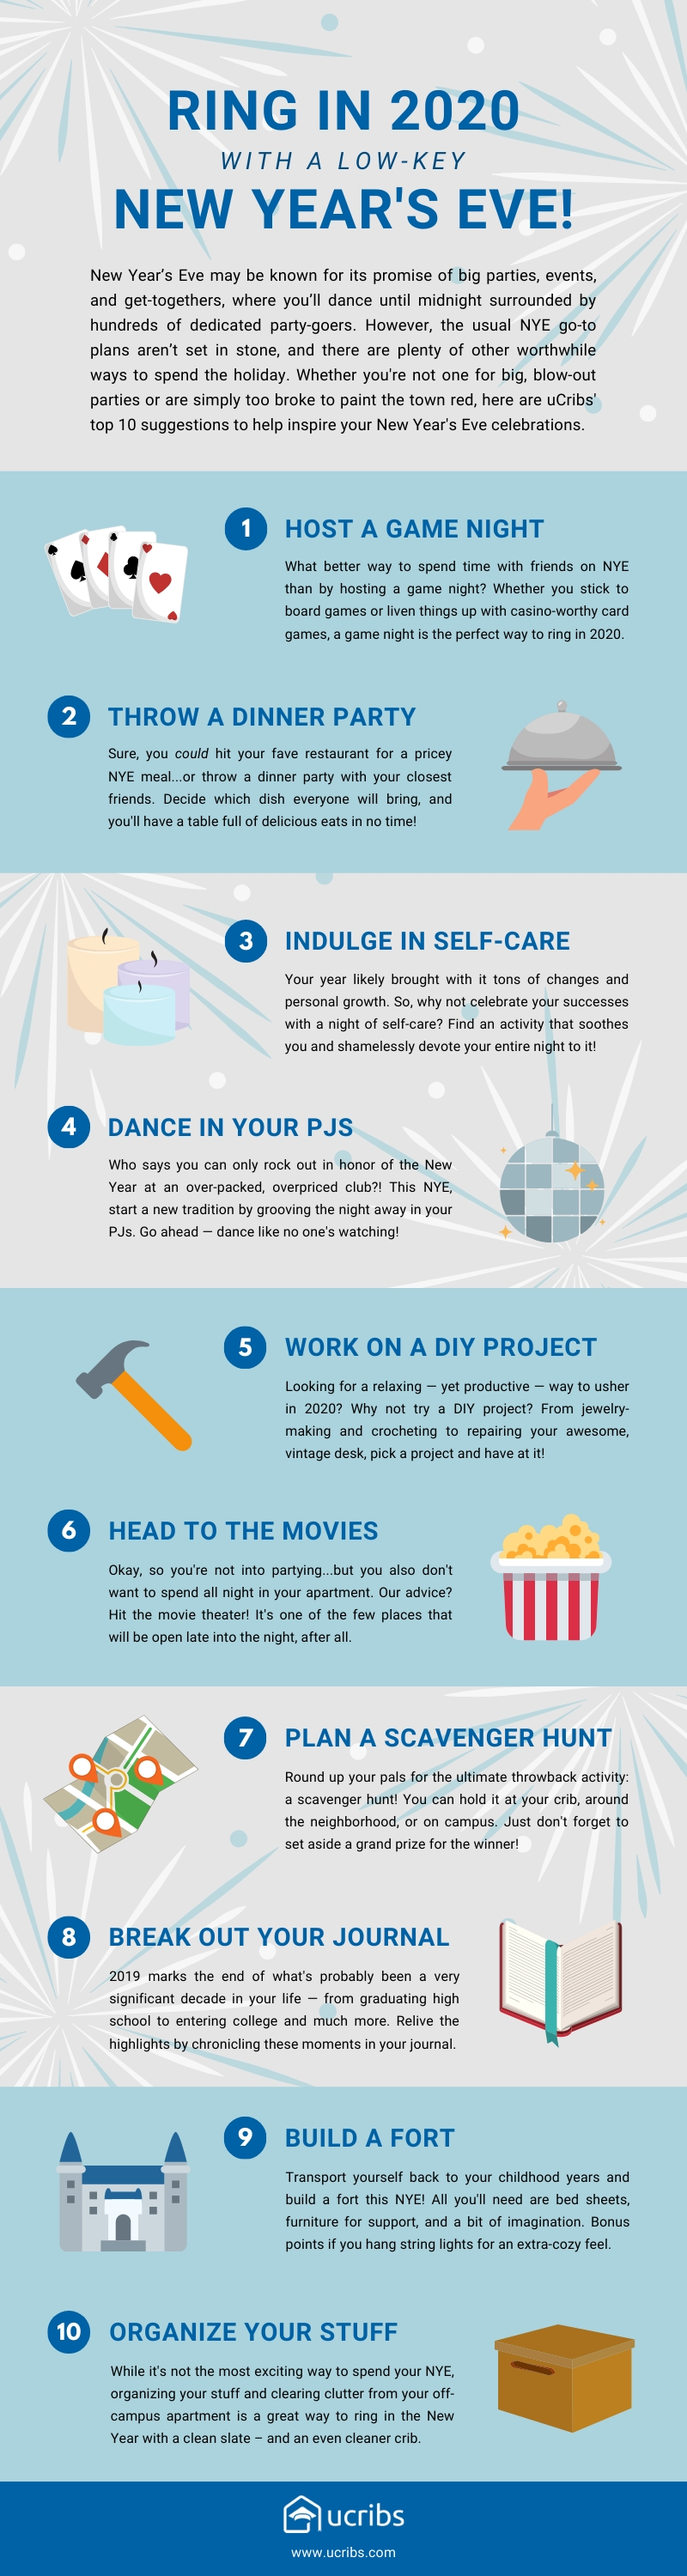 infographic, new year's eve, new year's day, nye, ideas, party, low-key, relaxing